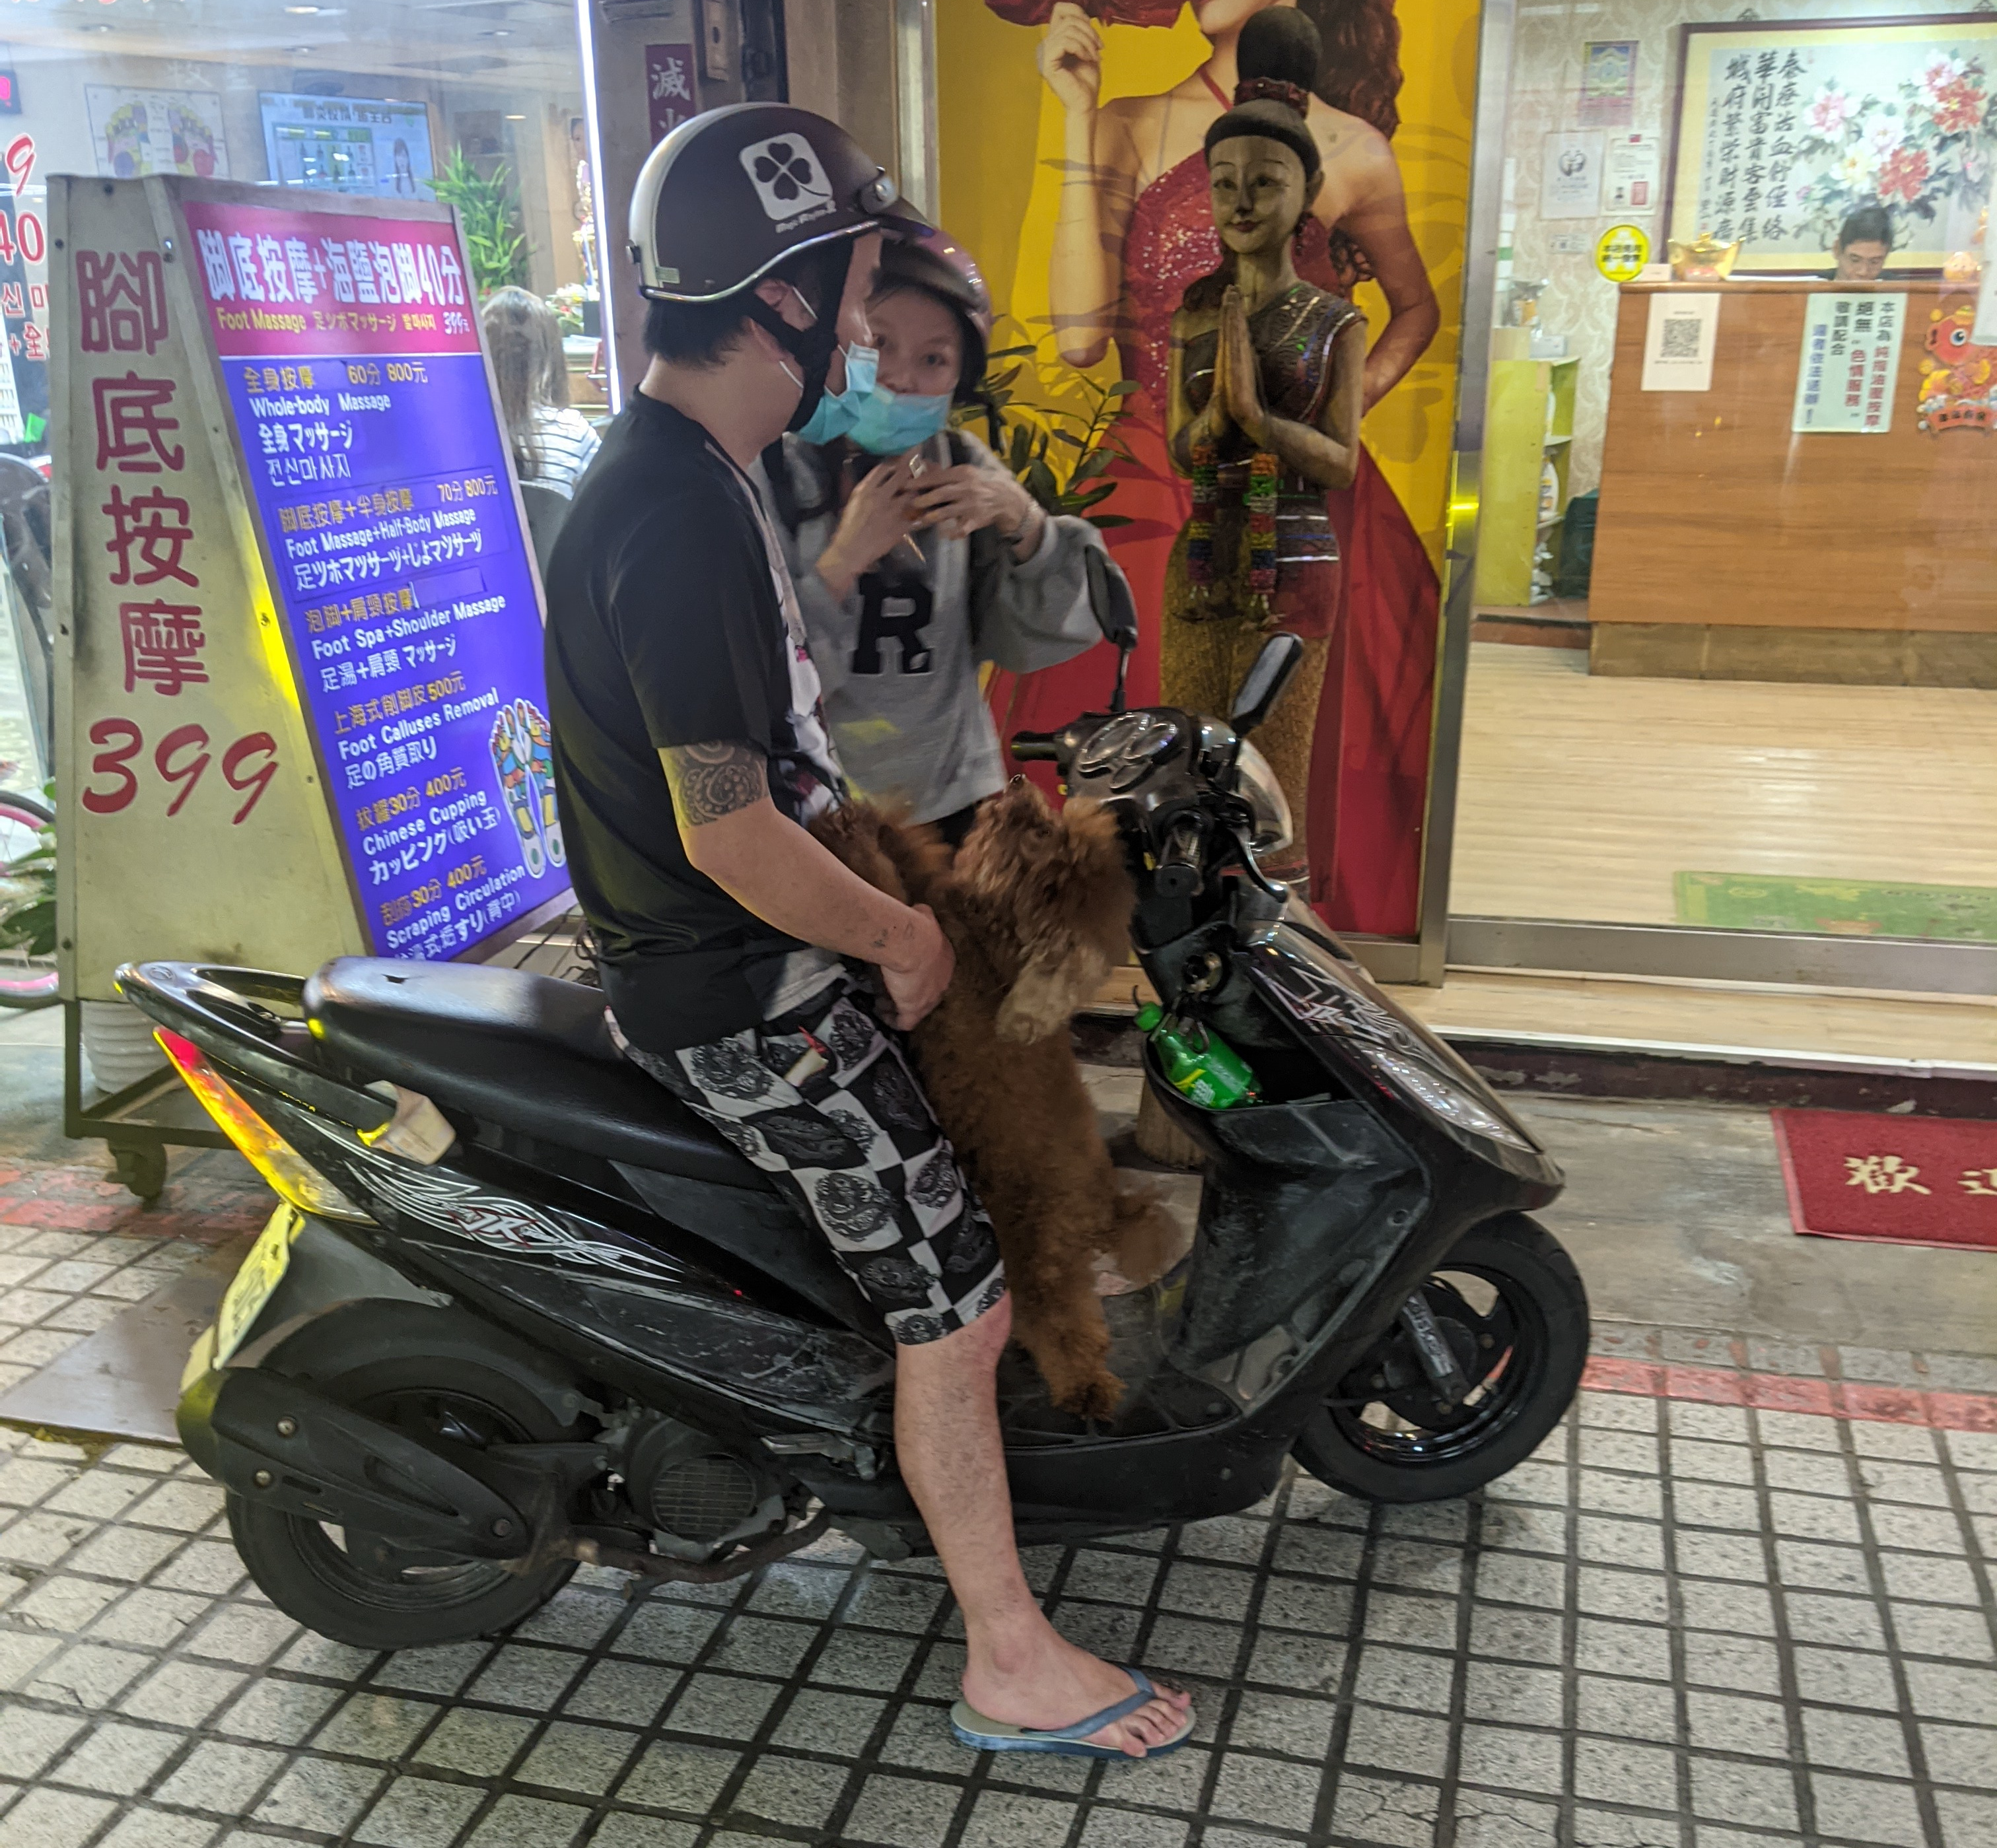 A dog standing at the feet of someone riding a scooter.